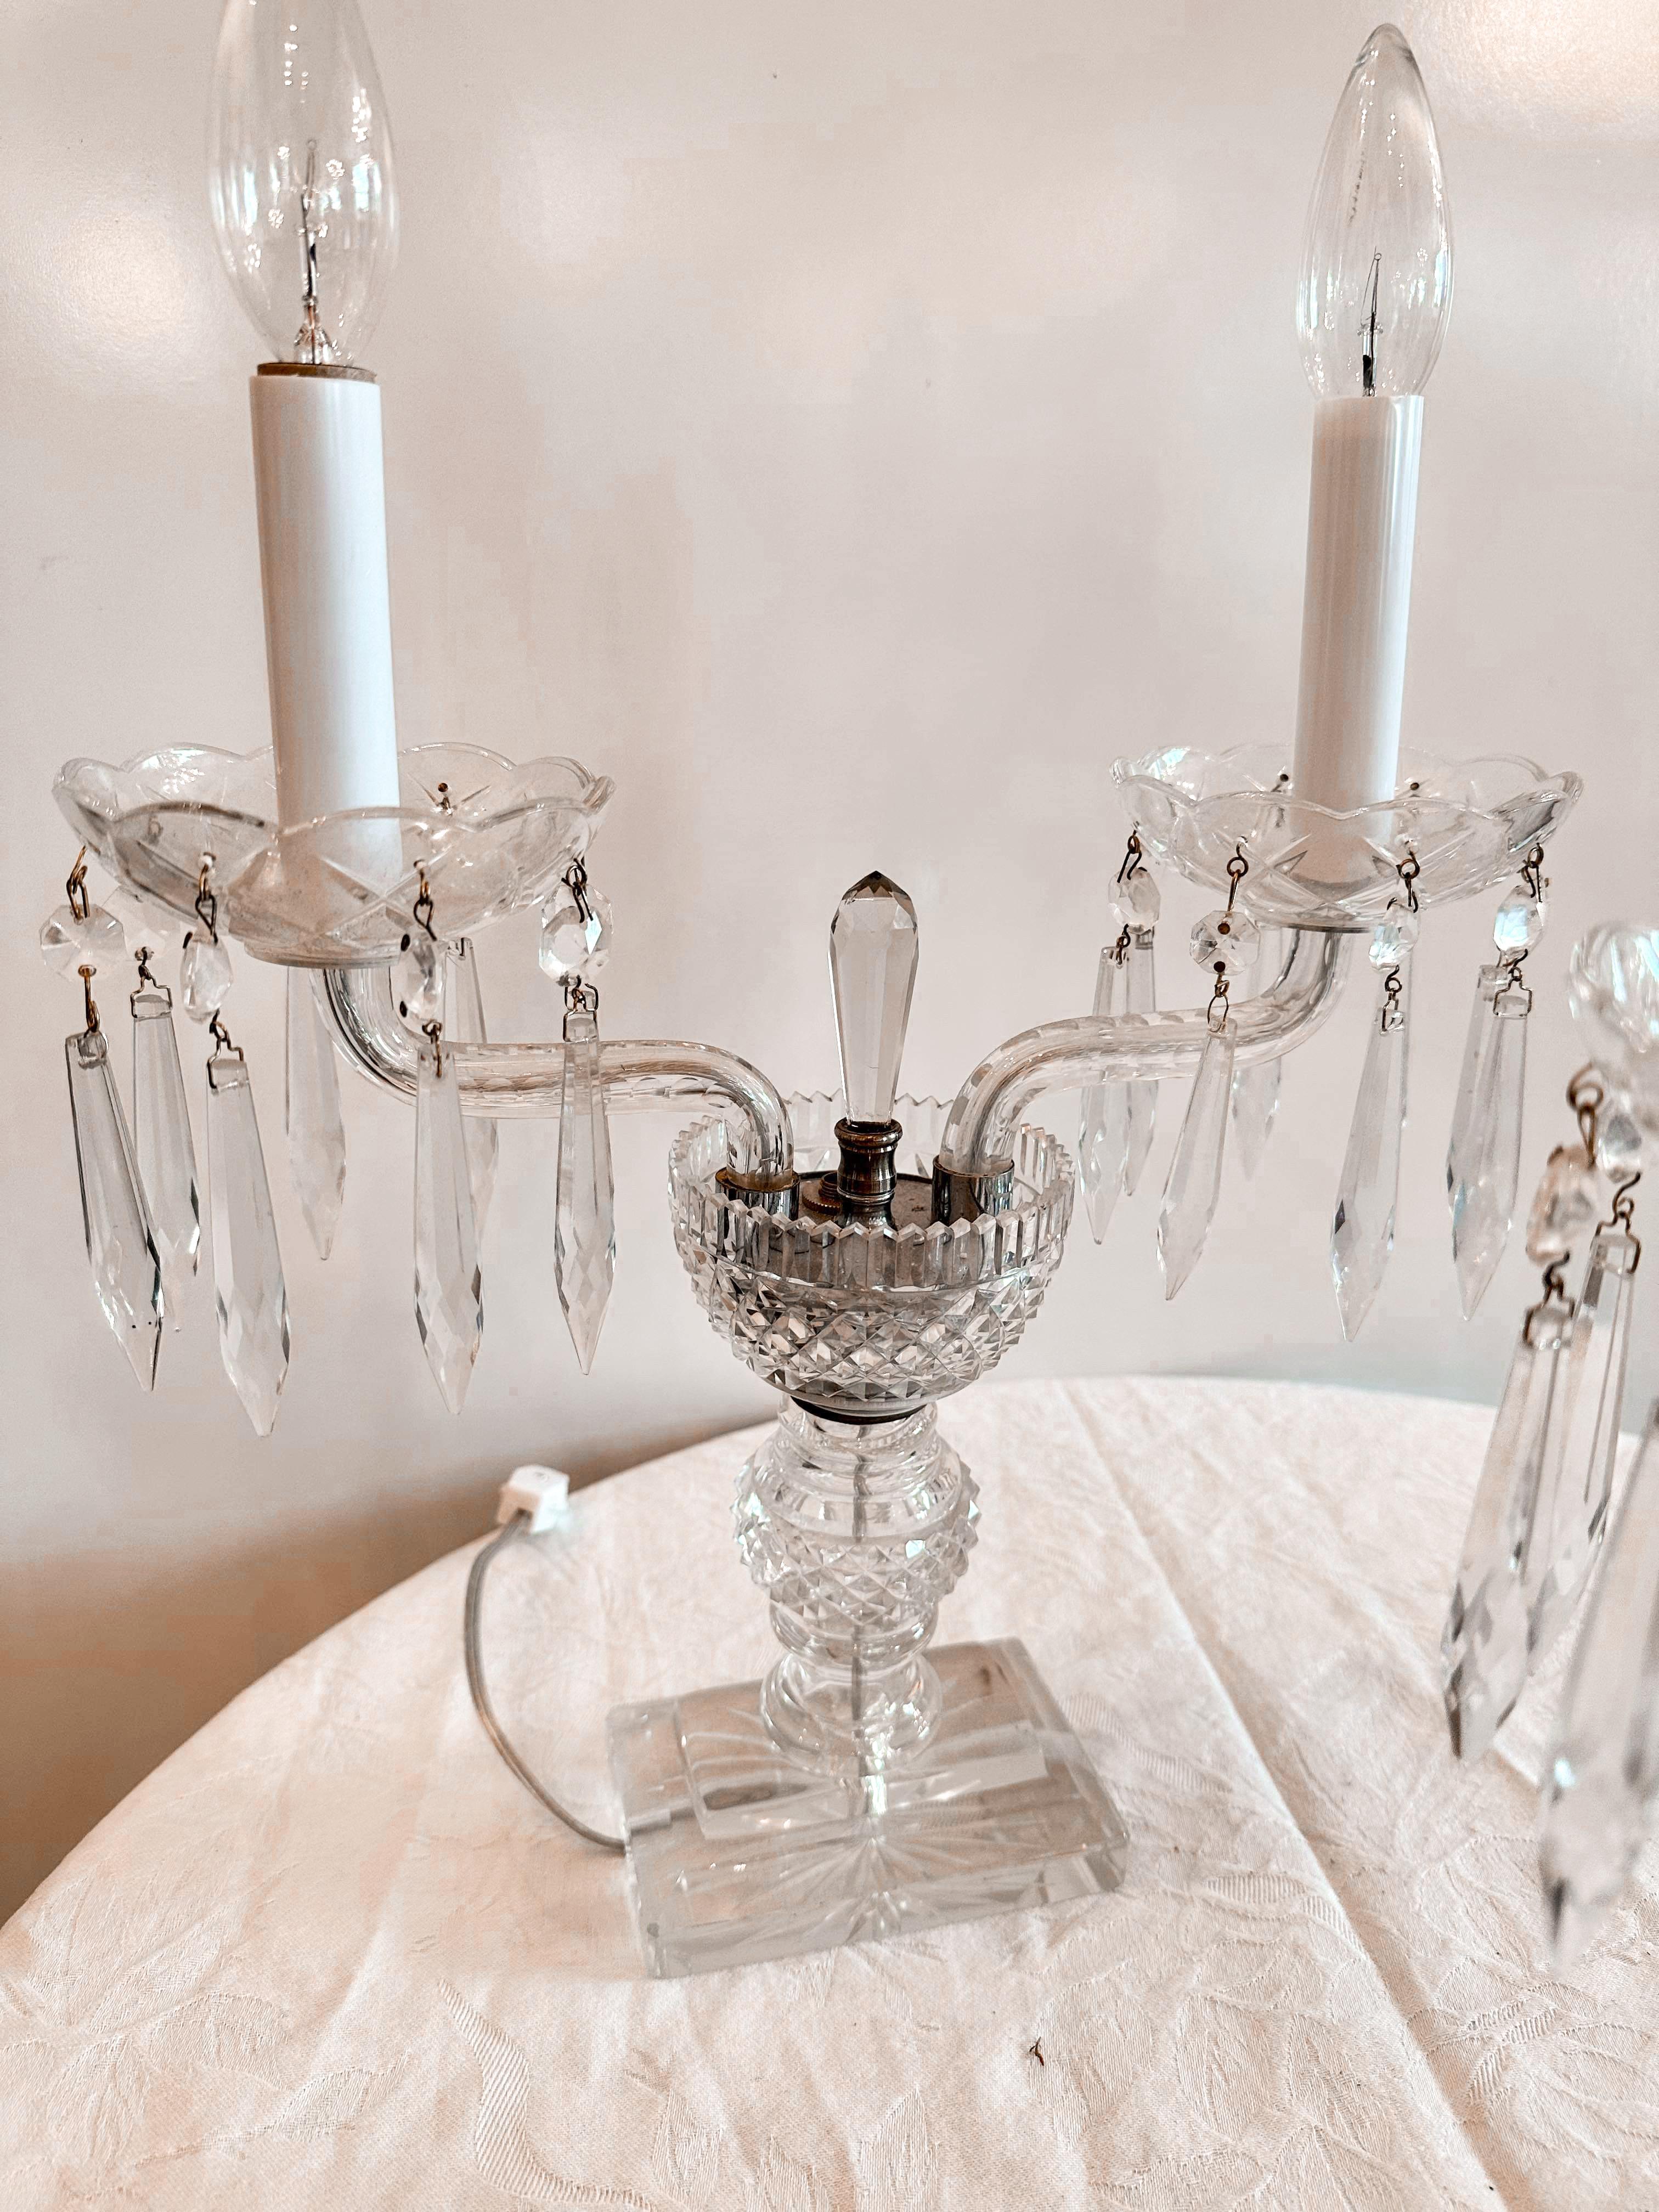 Tell me if you've ever in your life seen a pair of crystal chandelier style lamps that didn't immediately make you think of Marilyn Monroe's earrings? I surely can't be the only one! The woman had excellent taste in jewelry, just the same as the